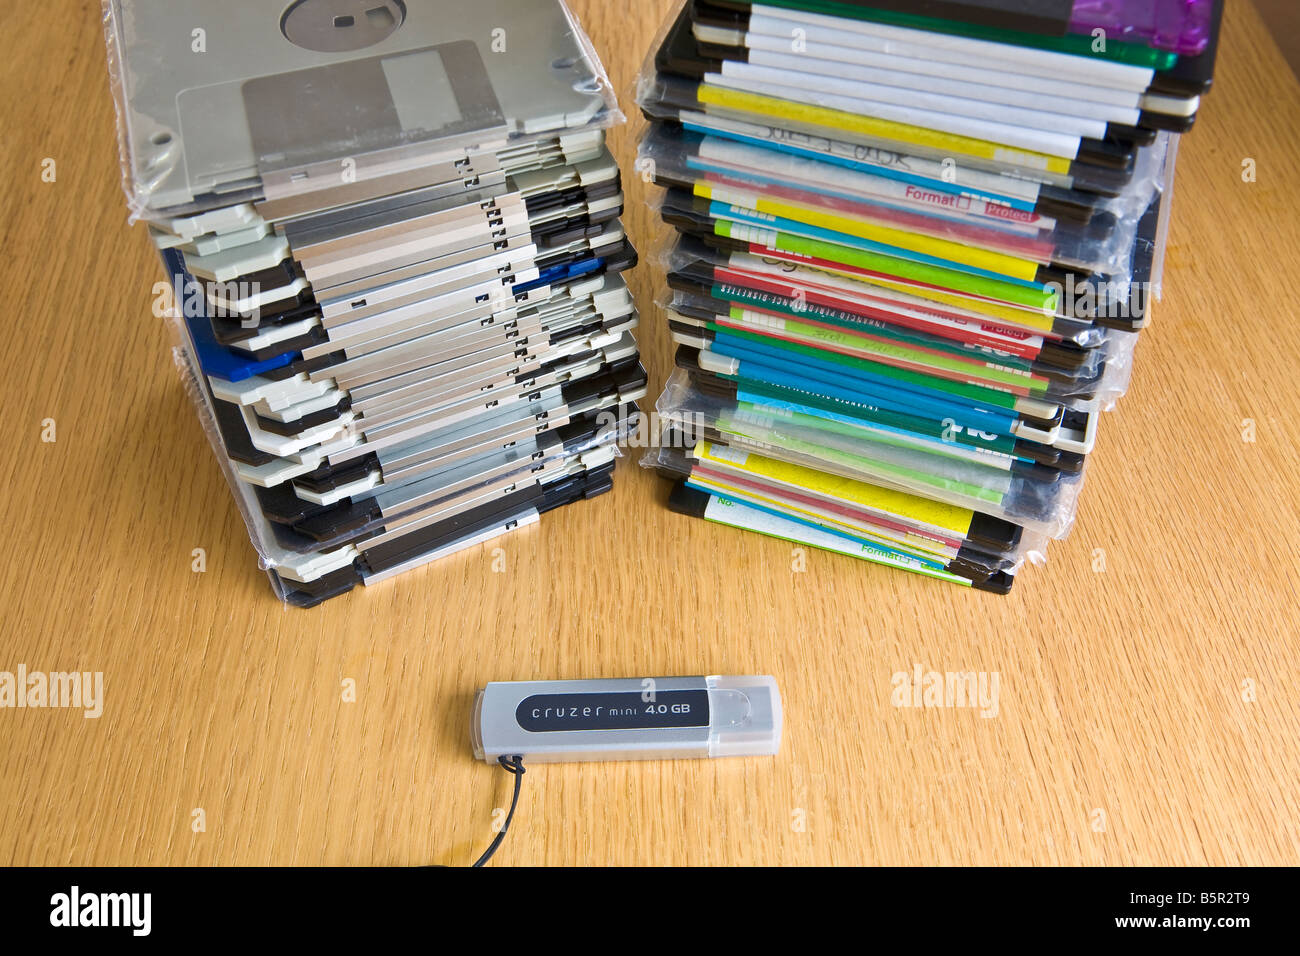 Modern flash drive compared with obsolete 3.5 inch floppy disks Stock Photo  - Alamy